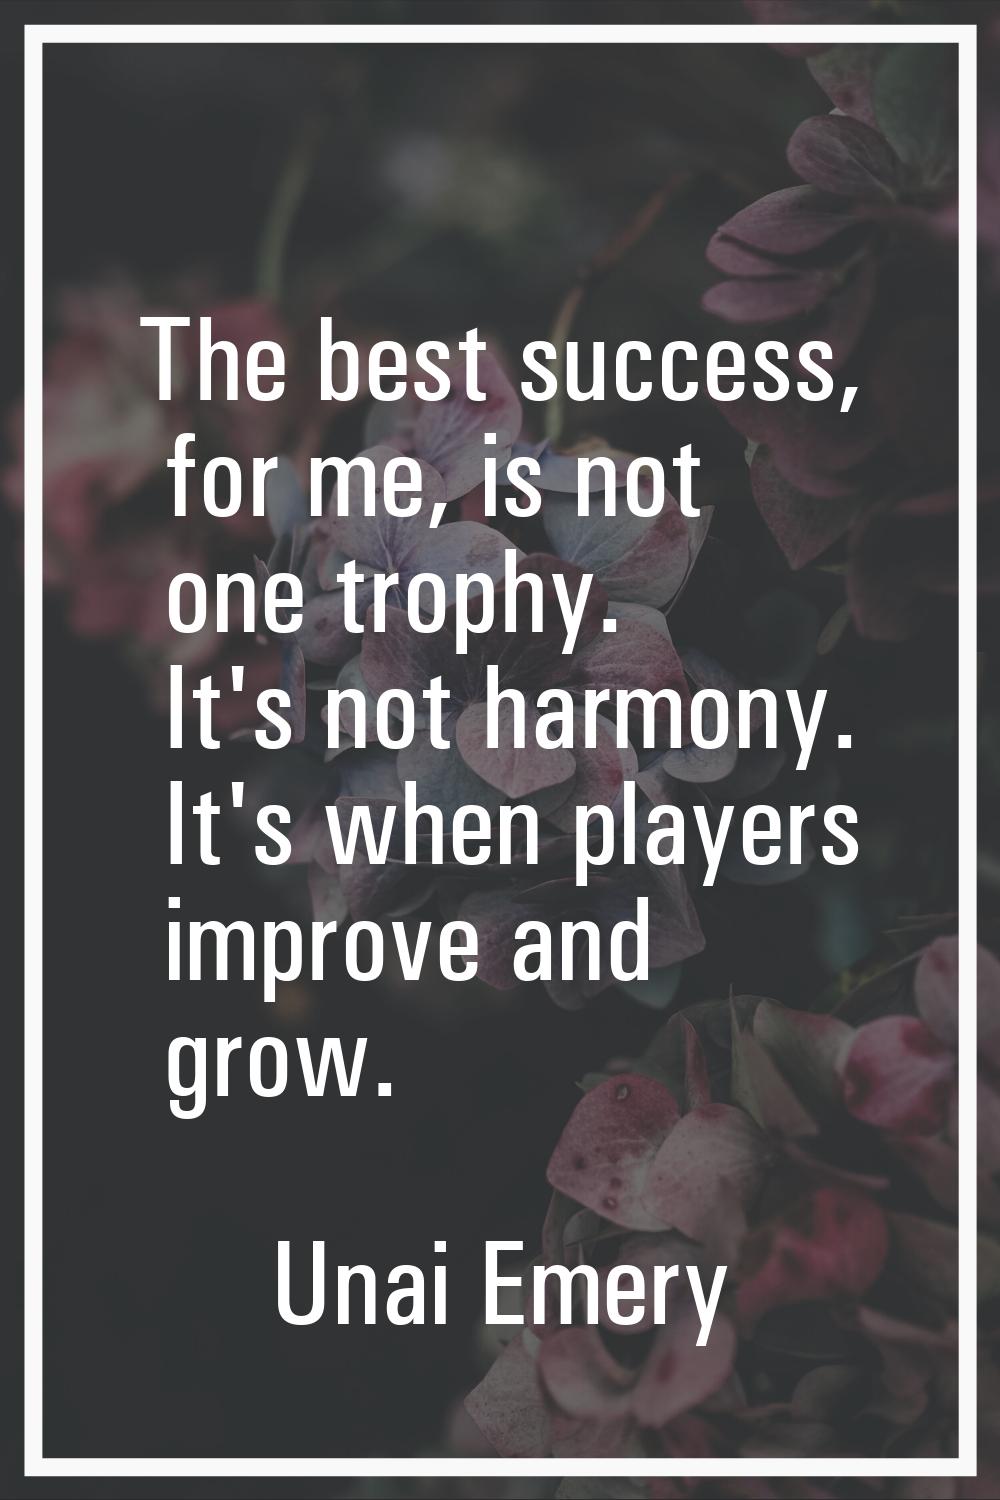 The best success, for me, is not one trophy. It's not harmony. It's when players improve and grow.